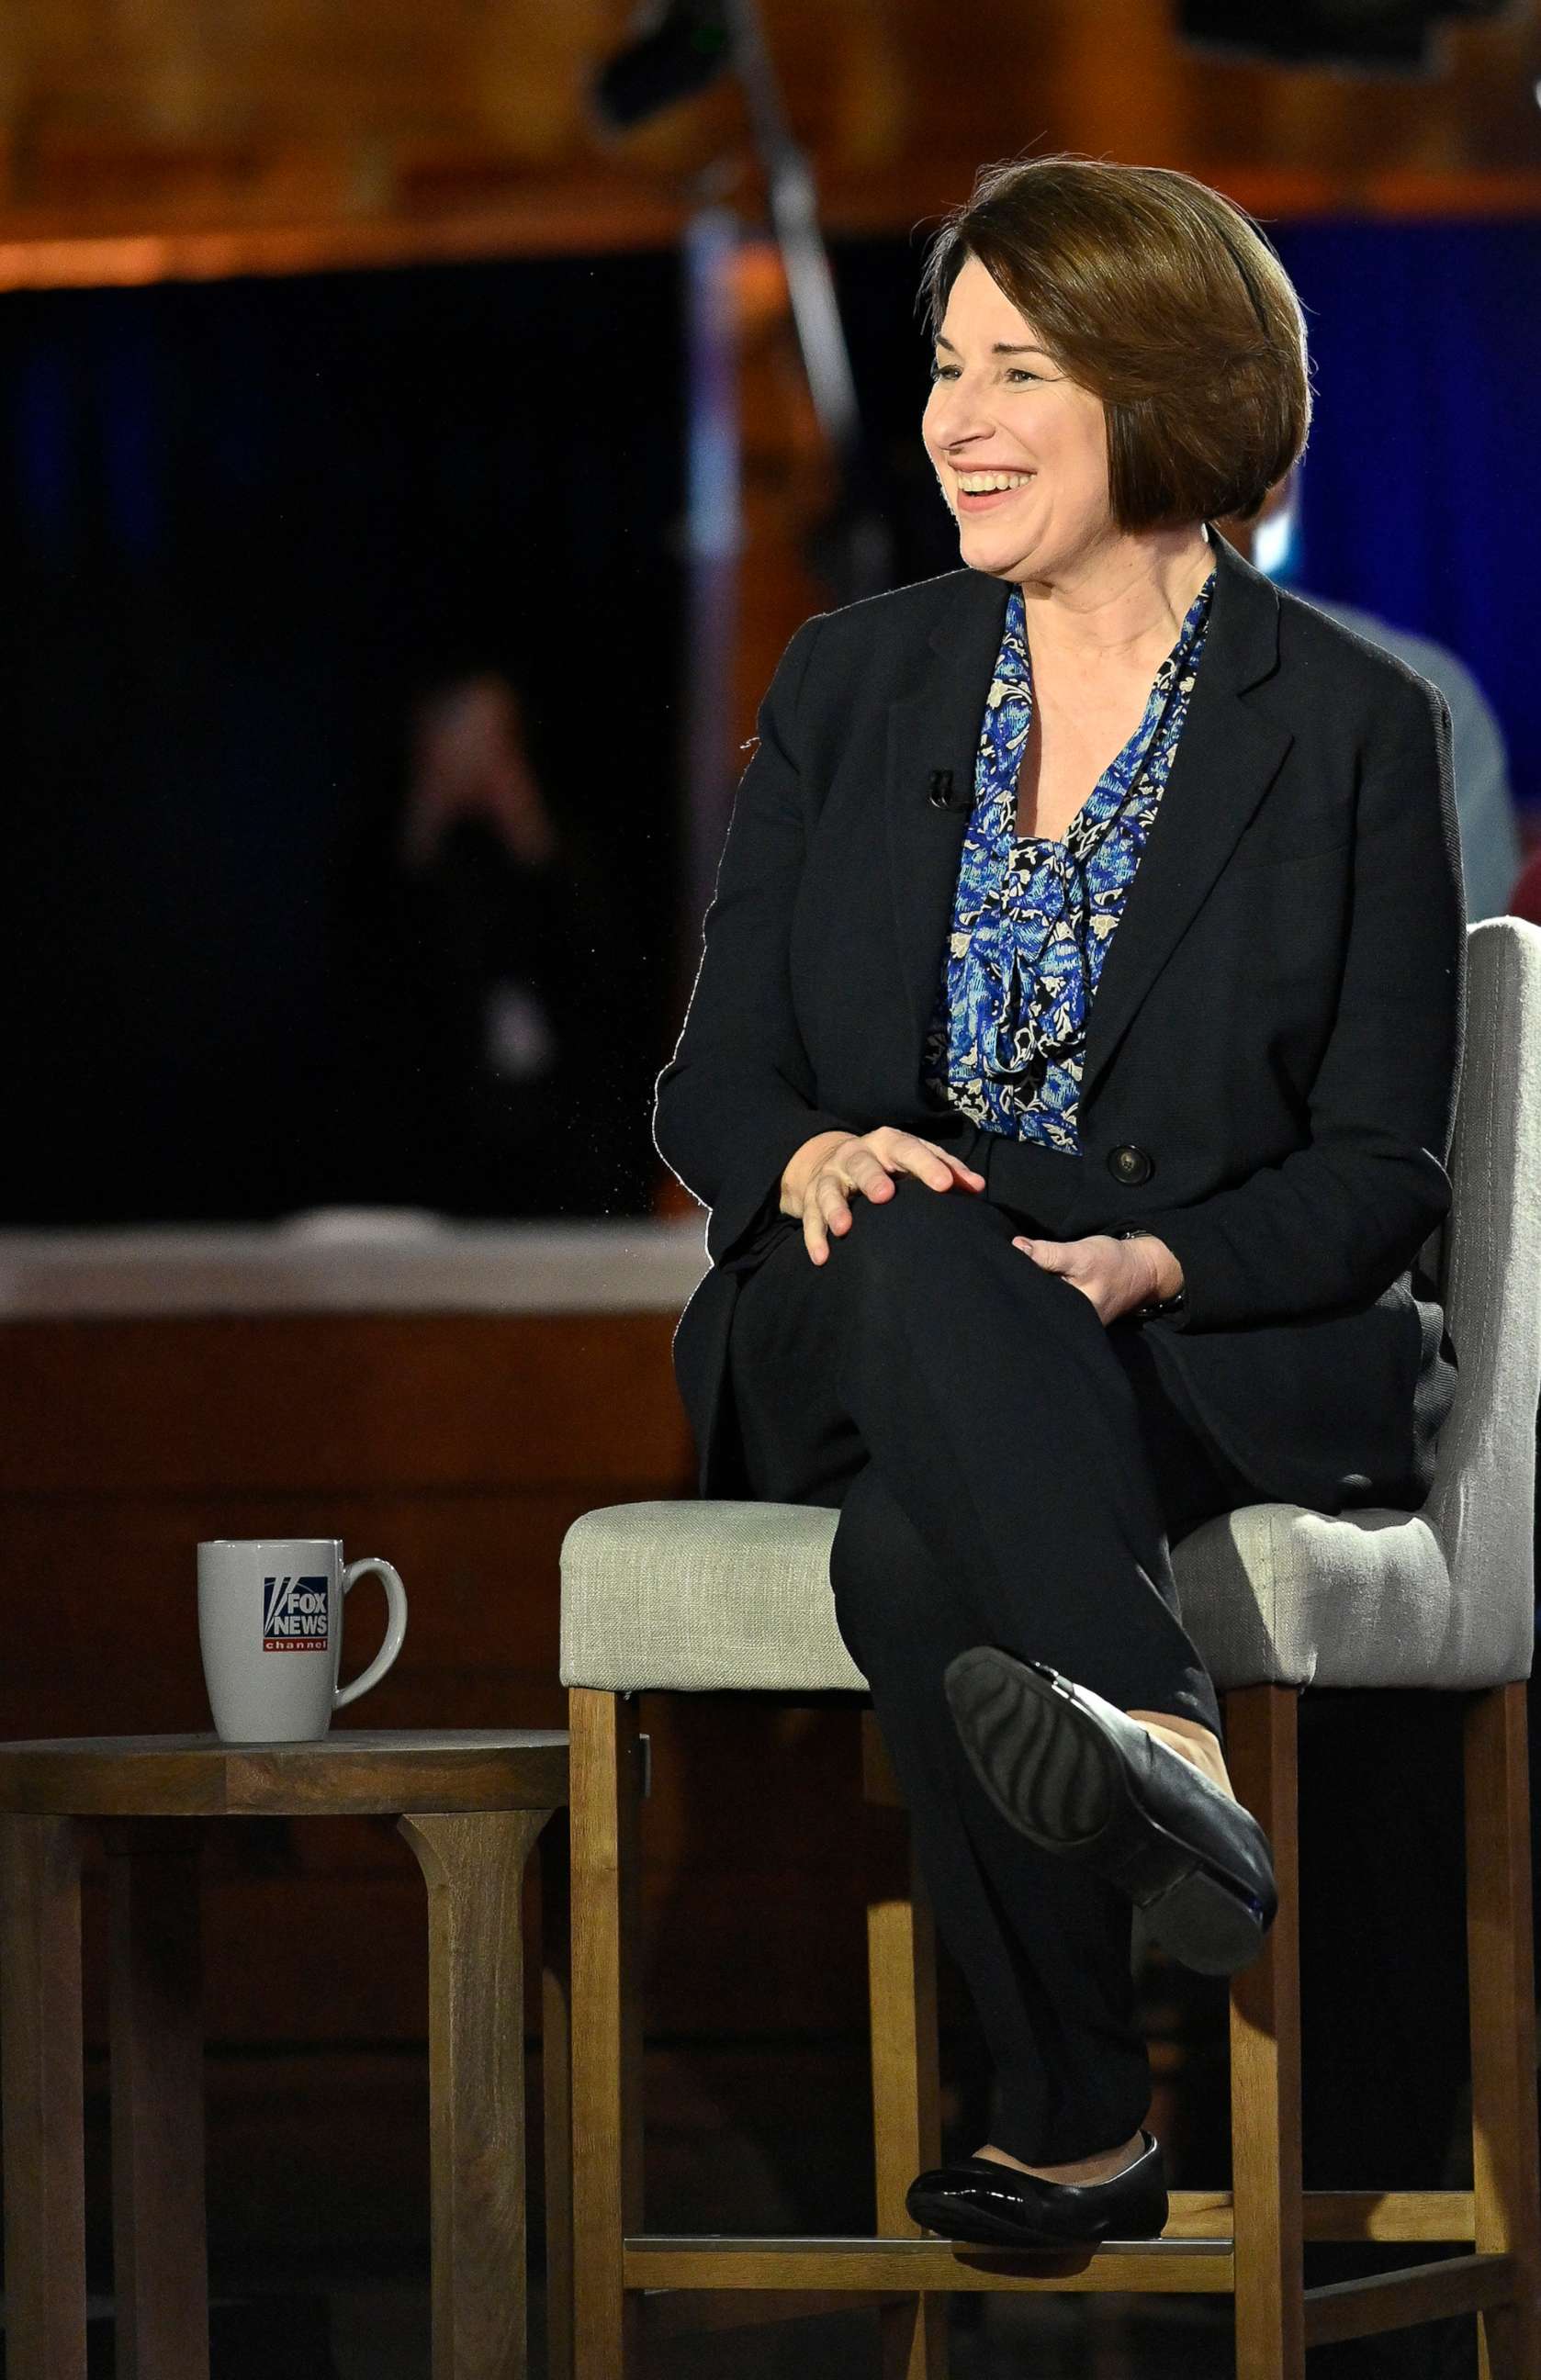 PHOTO: Democratic presidential candidate Sen. Amy Klobuchar participates in a Fox News Channel town hall co-moderated by Bret Baier and Martha MacCallum at Cypress Manor, on Feb. 27, 2020, in Raleigh, North Carolina.